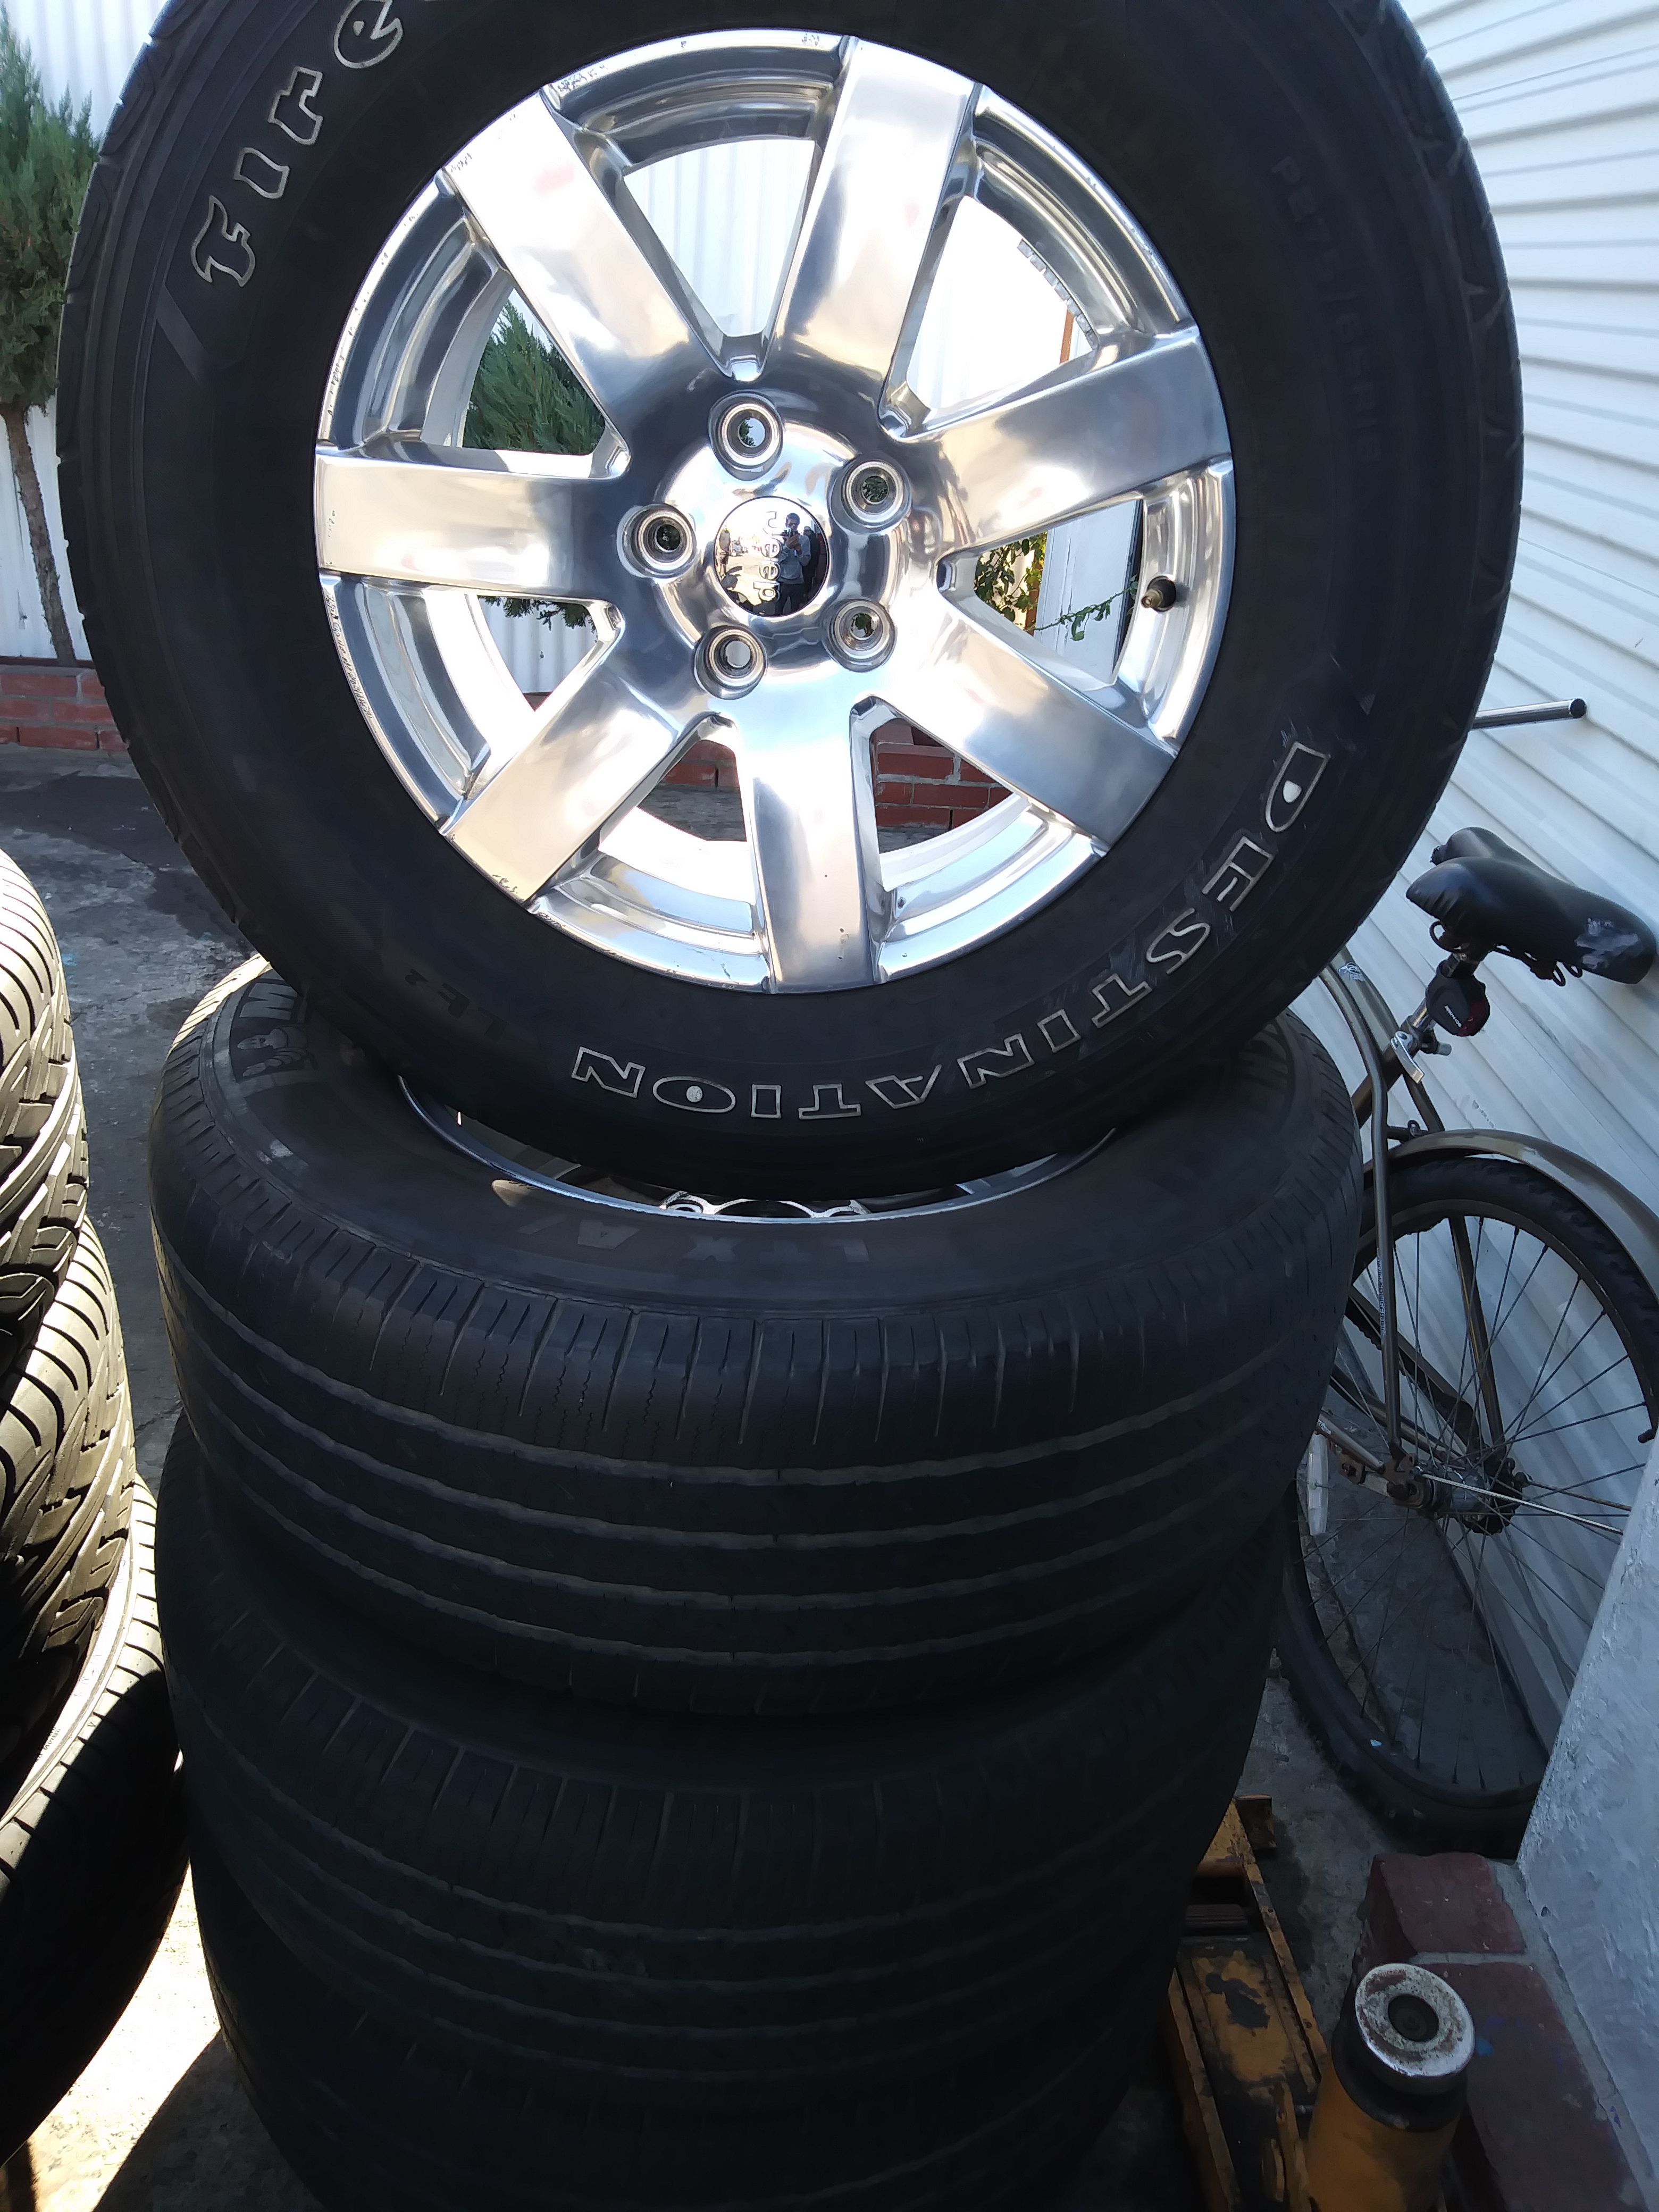 Jeep wheels & 26's hit me up also acura & honda parts on deck